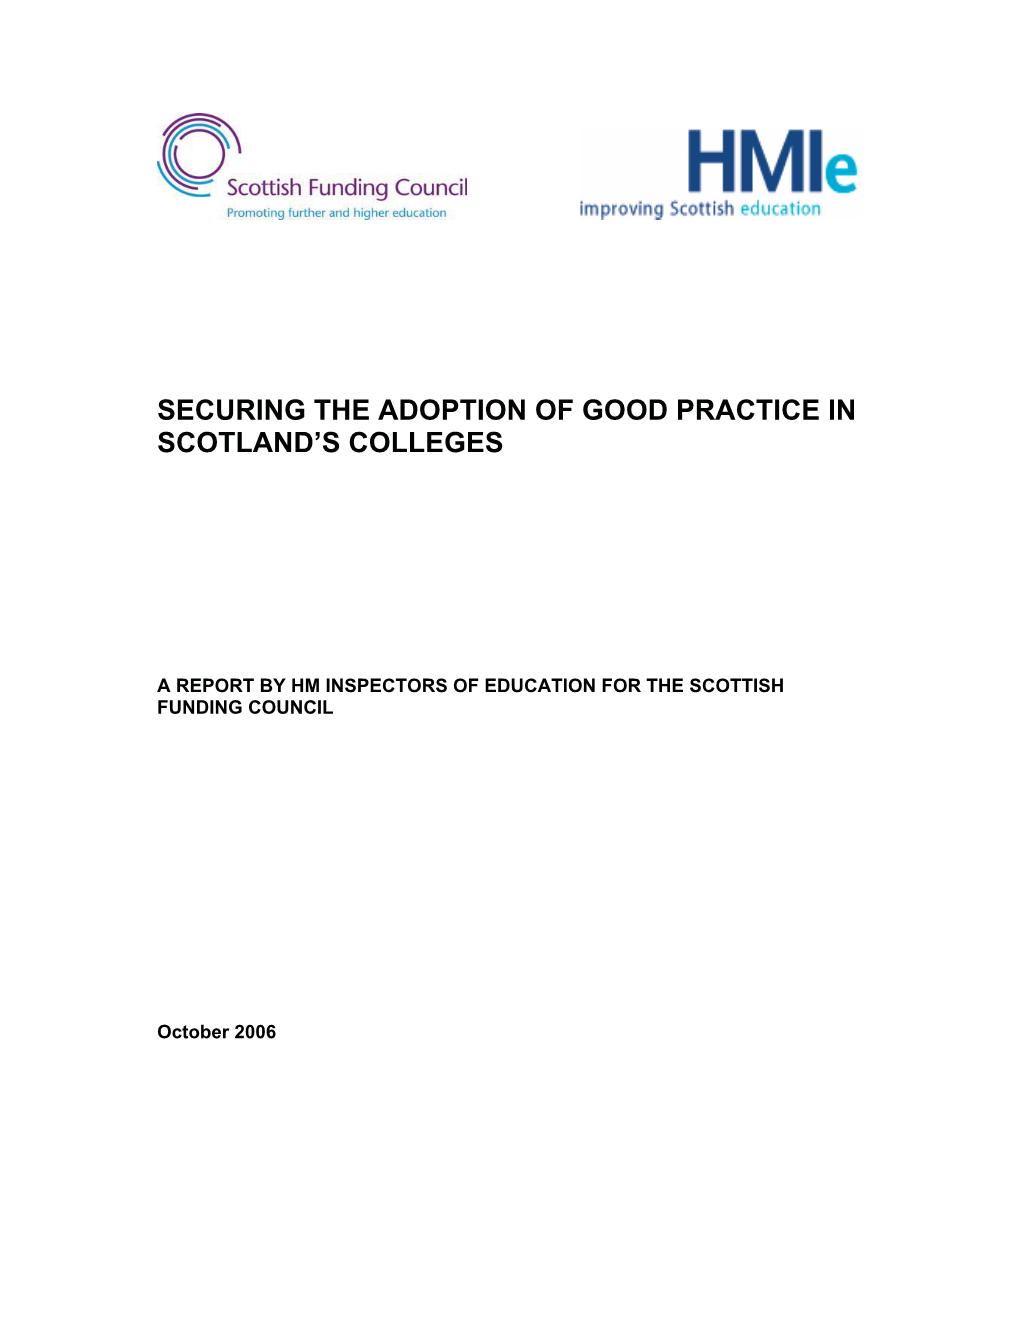 Securing the Adoption of Good Practice in Scotland's